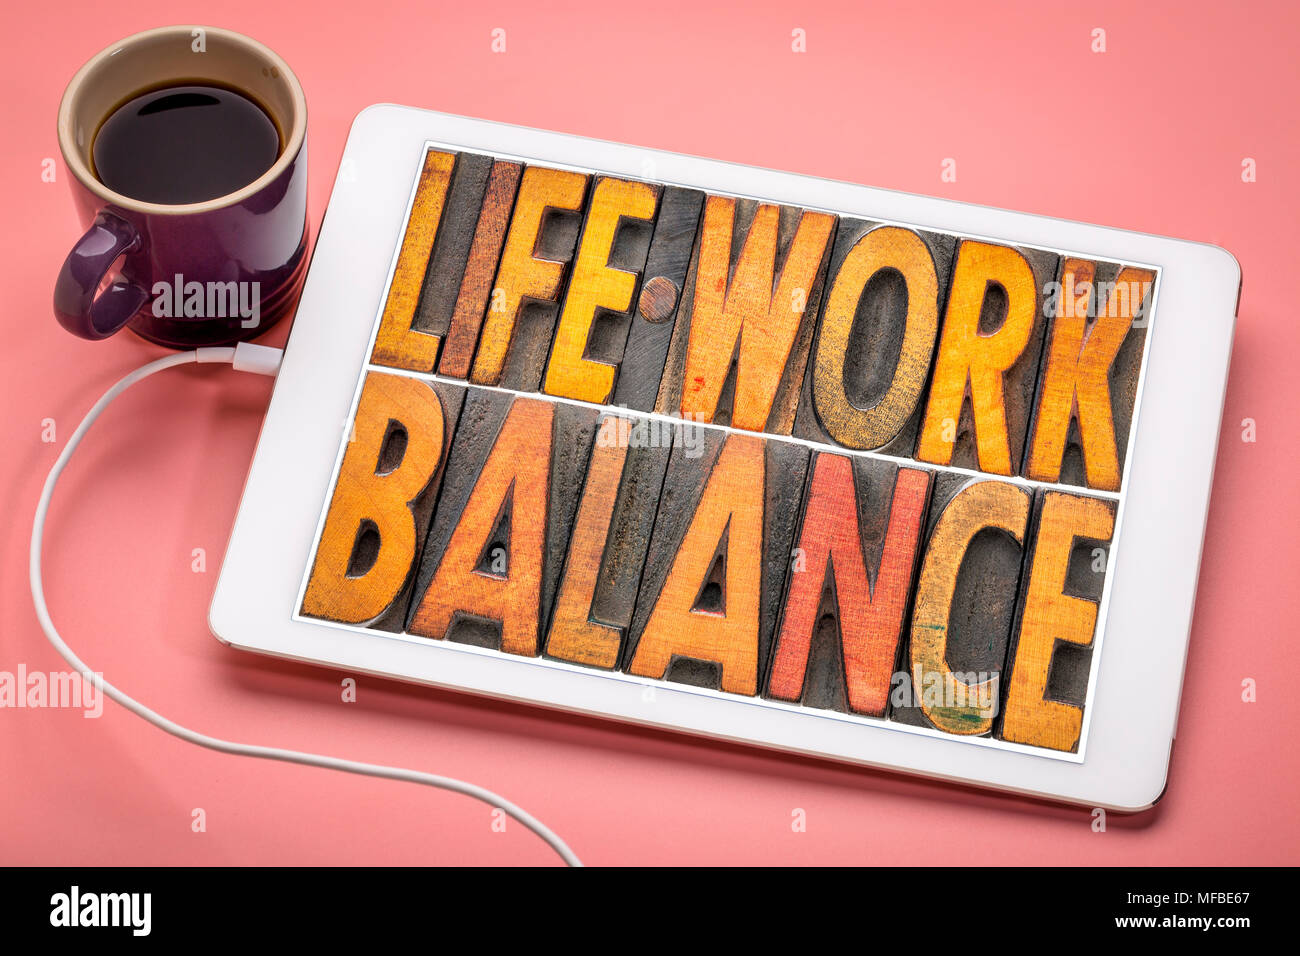 life work balance - word abstract in vintage letterpress wood type on a digital tbalet with a cup of coffee Stock Photo